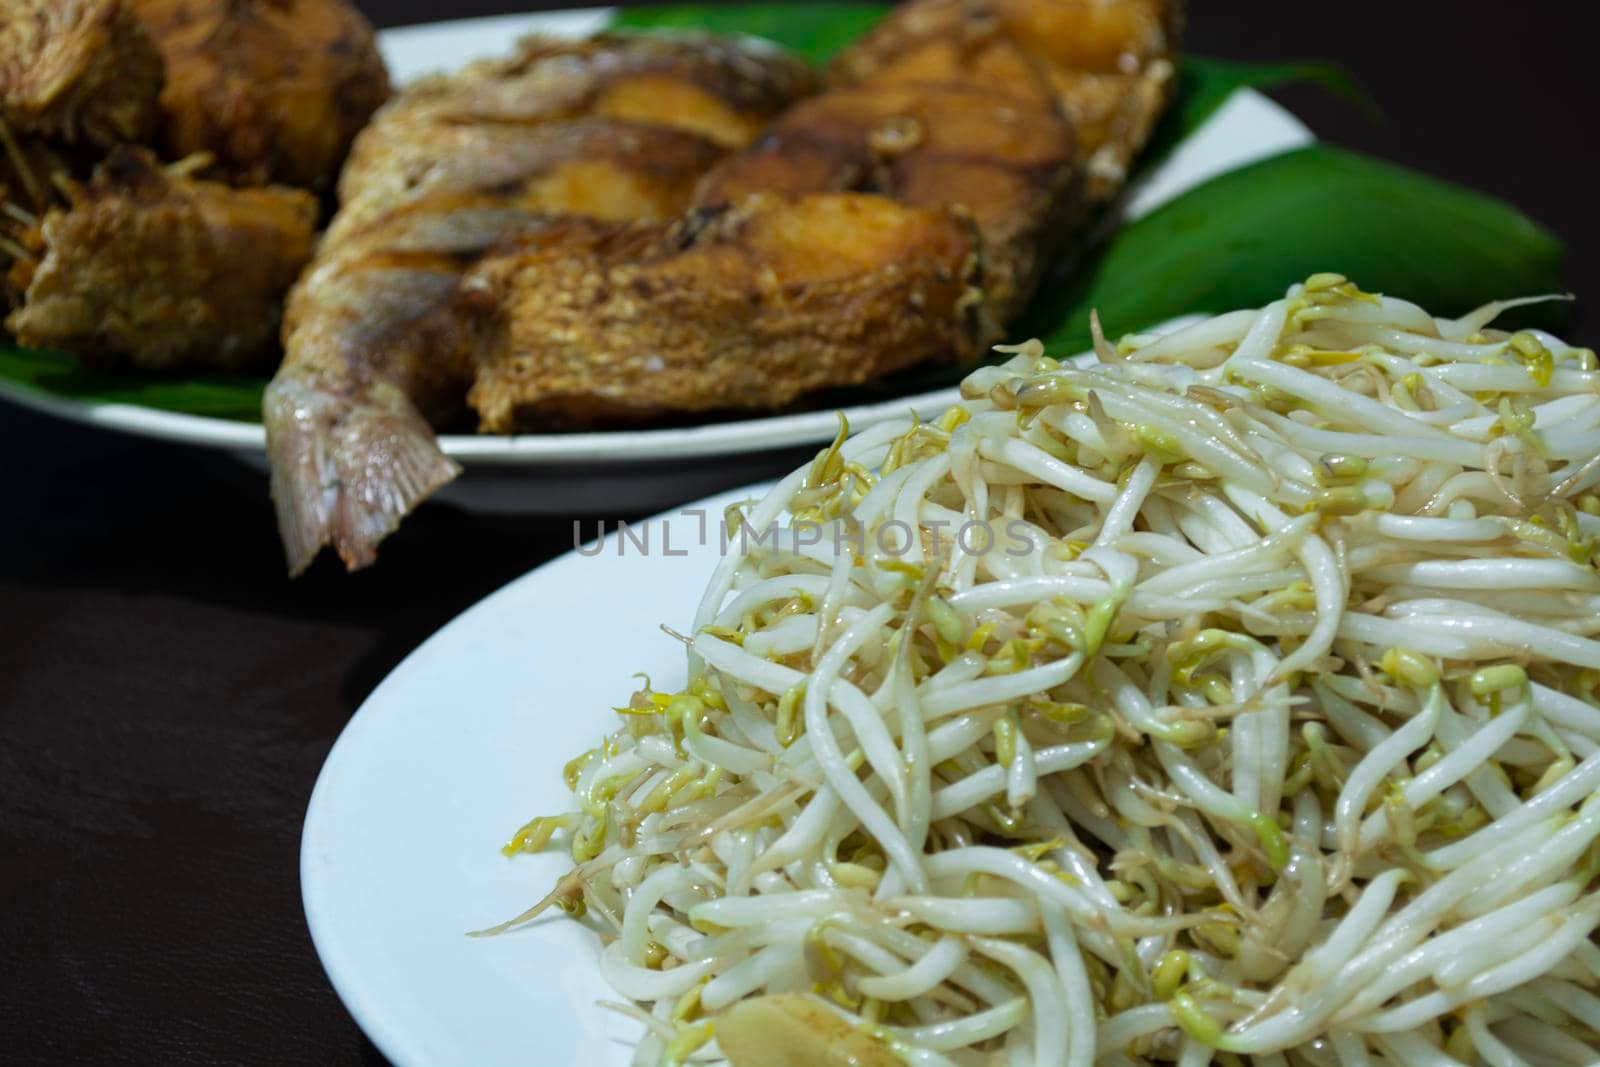 Fried bean sprouts with blurred background of fried fish